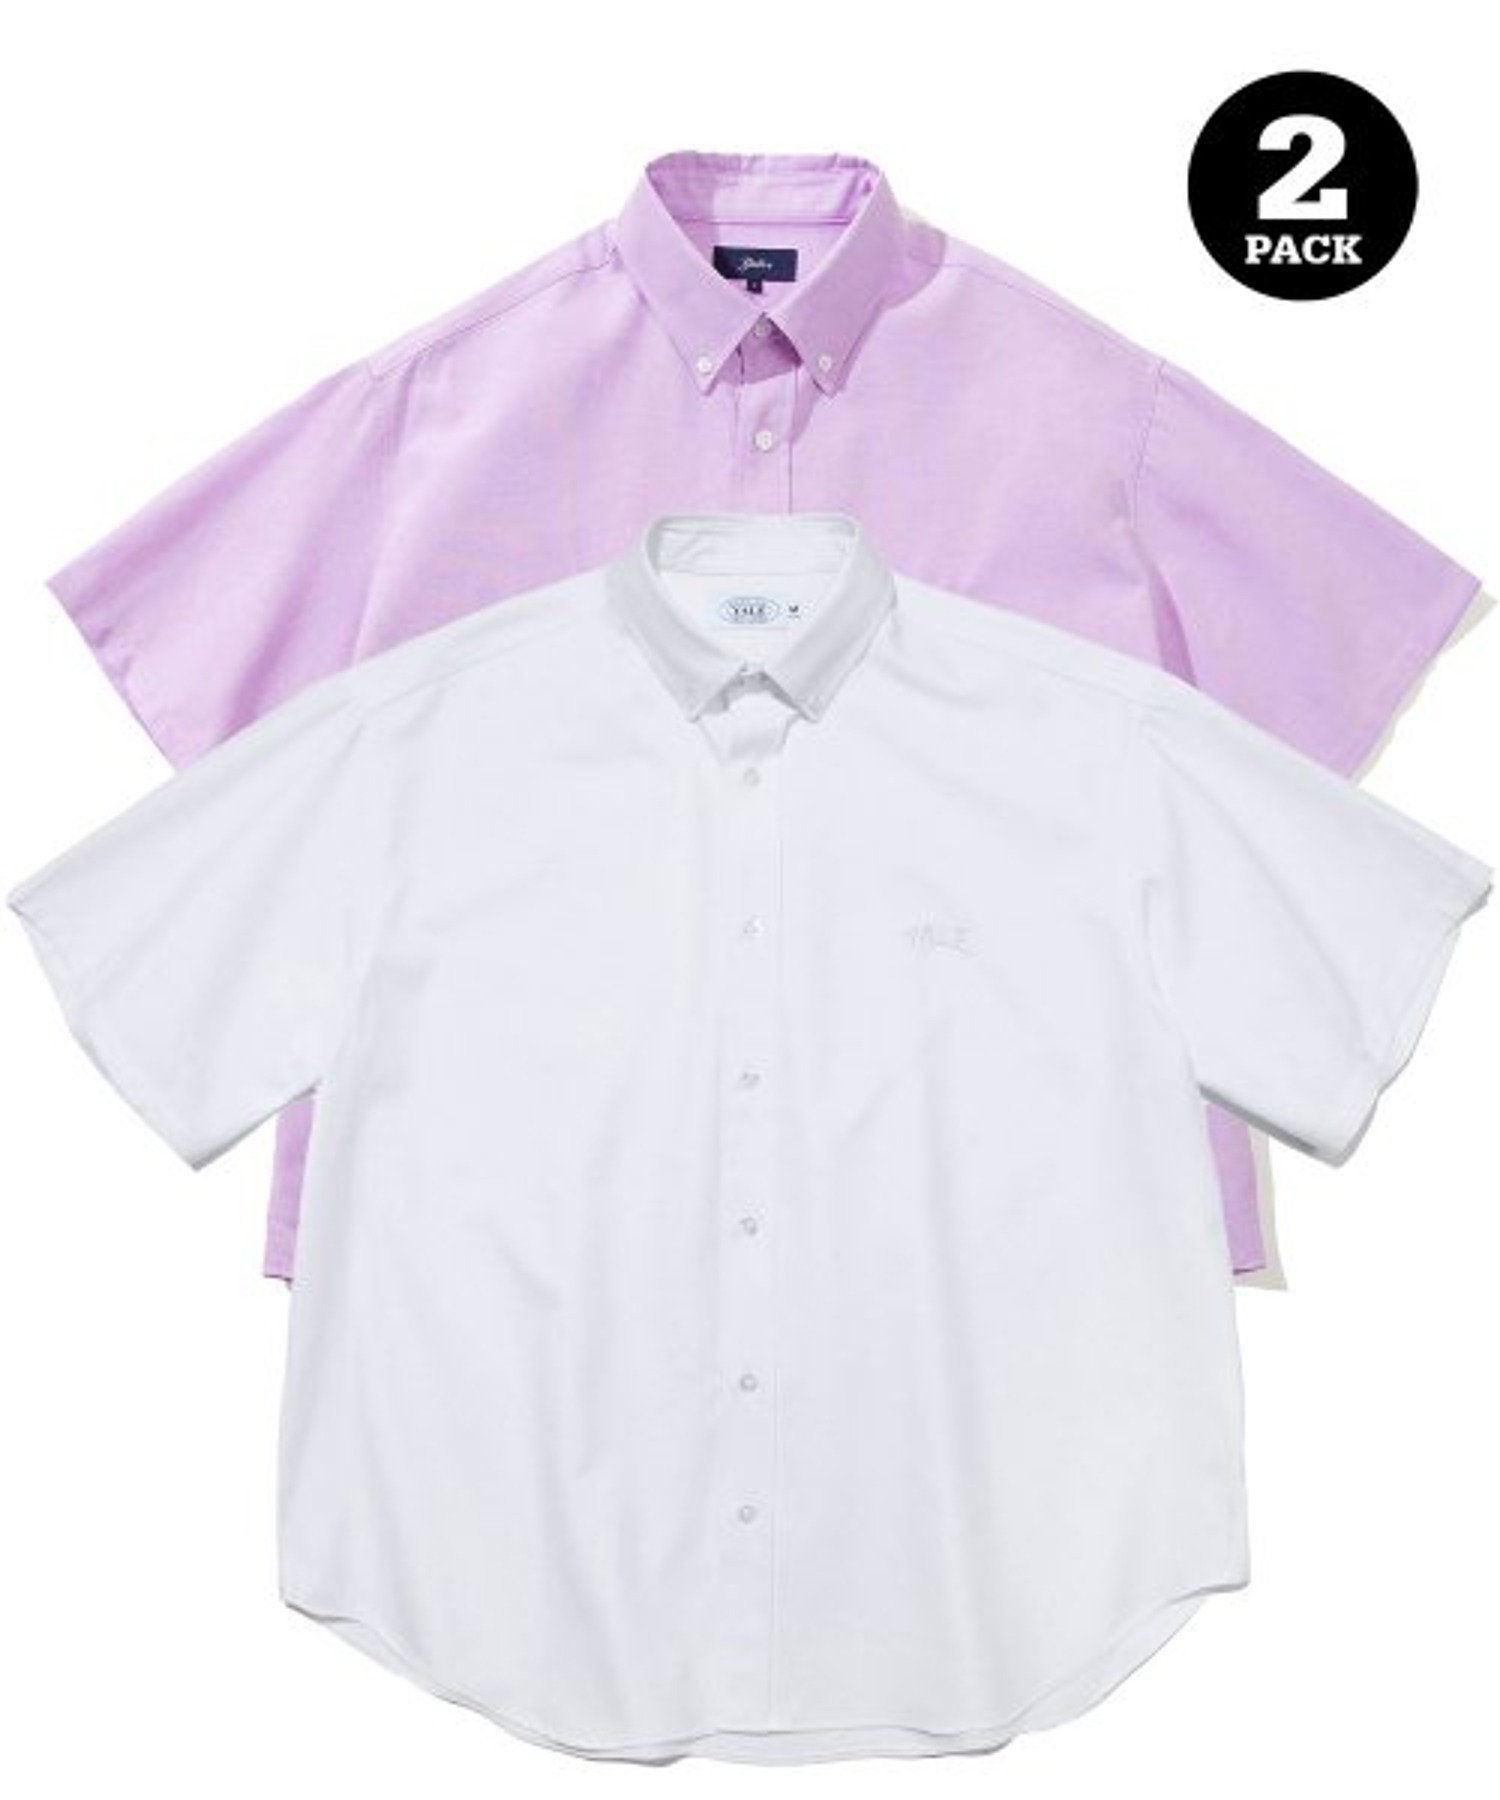 [ONEMILE WEAR] 2PACK BIG OXFORD SS SHIRT WHITE / PURPLE